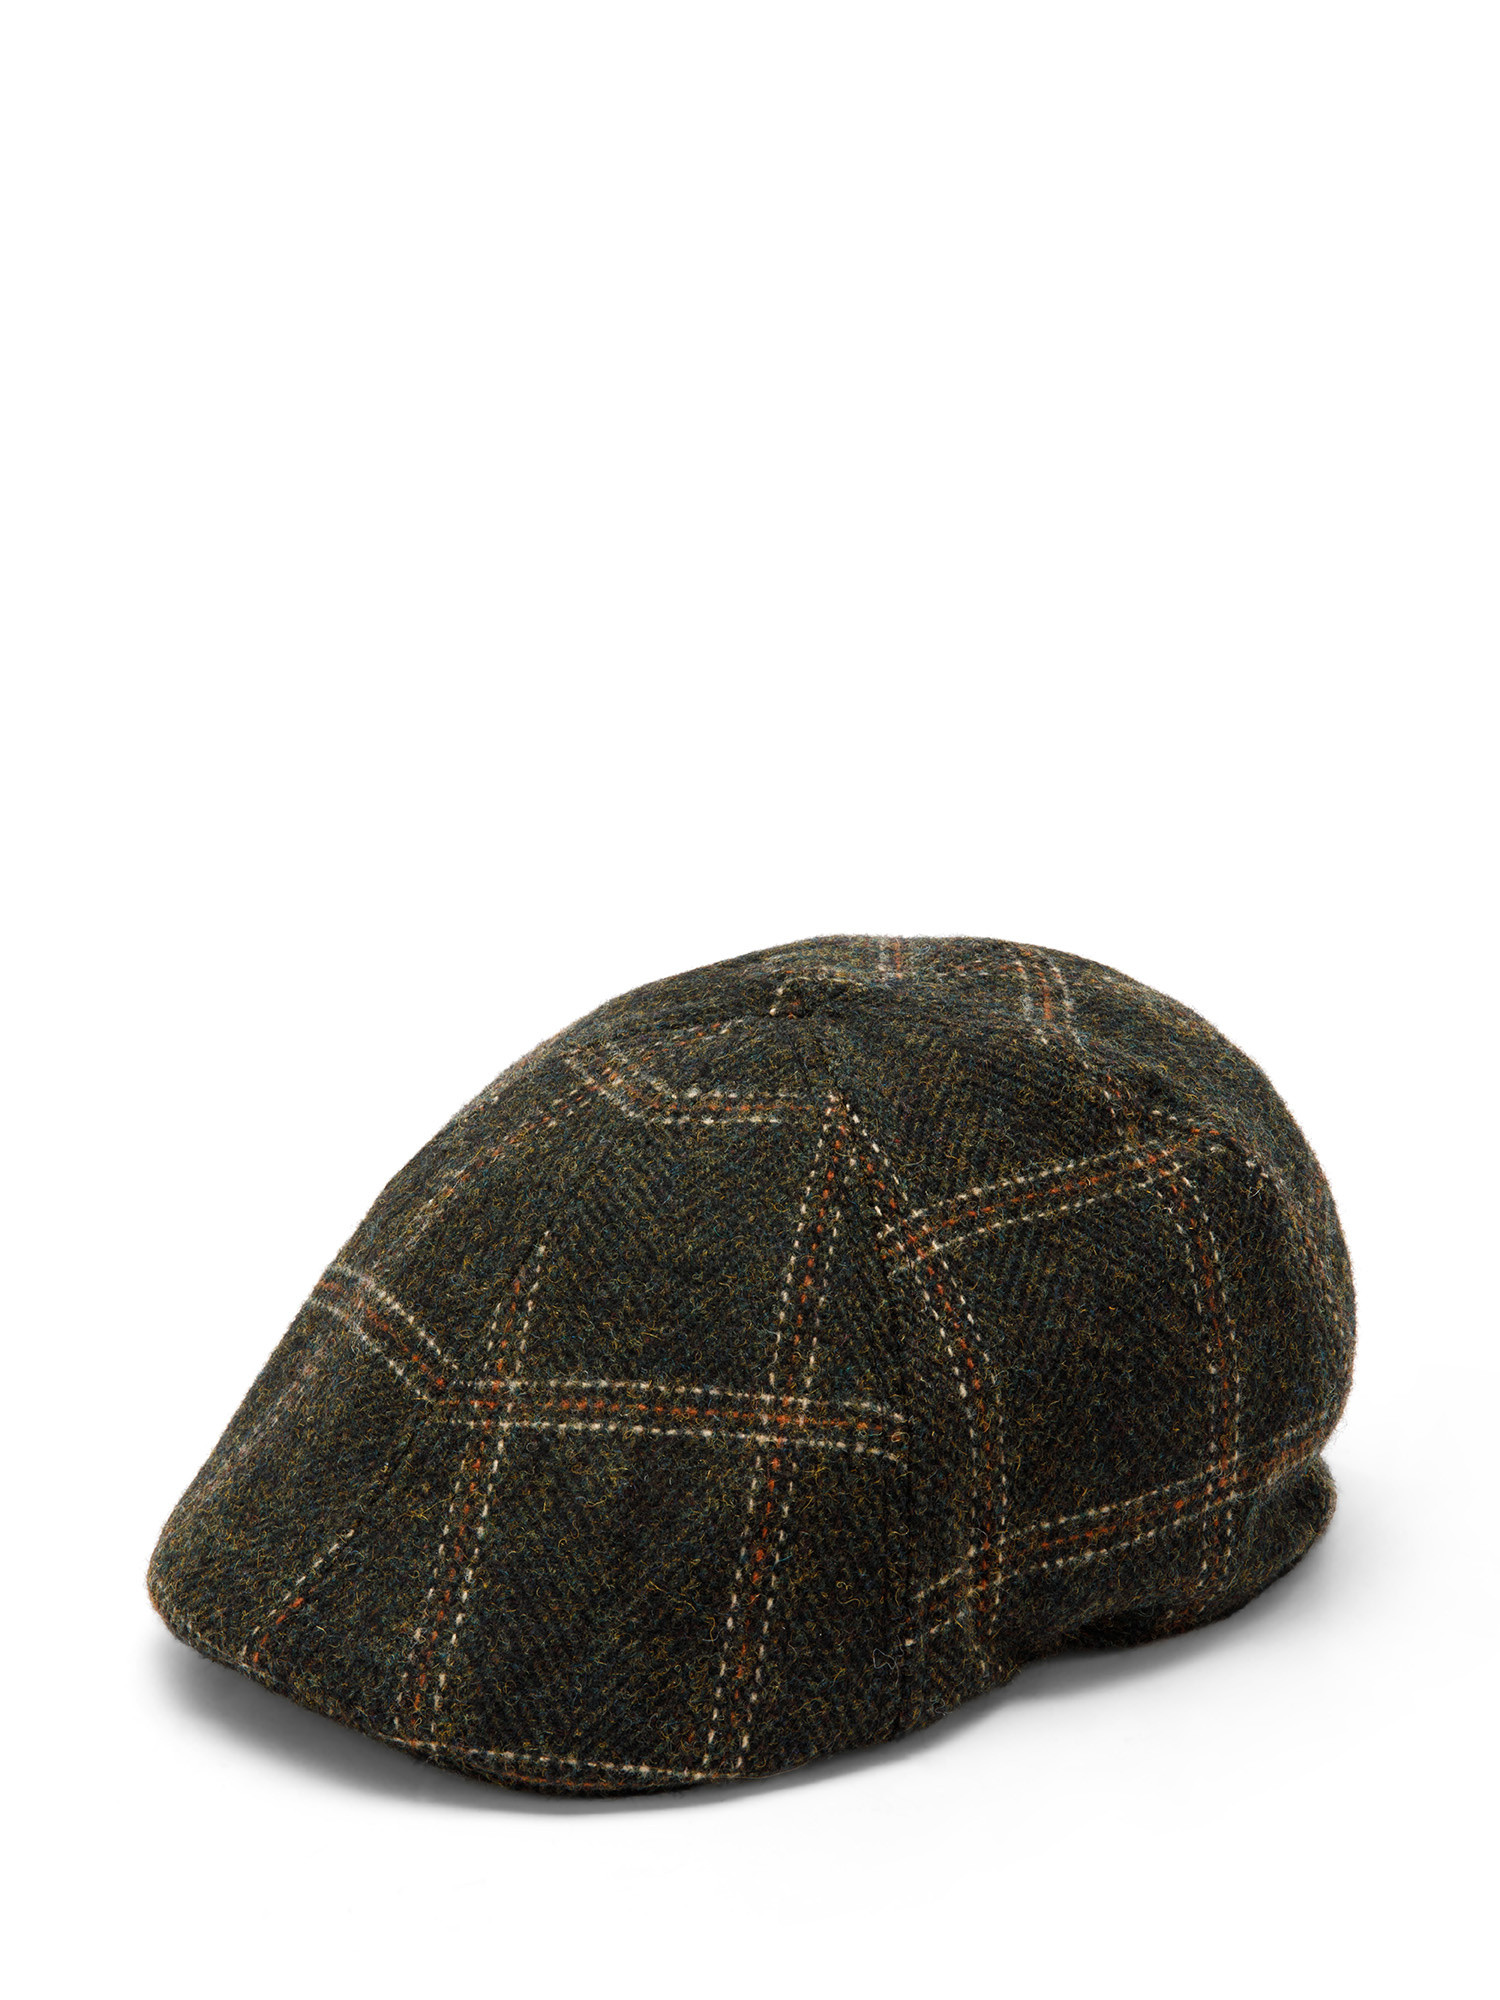 Luca D'Altieri - Checkered Coppola, Olive Green, large image number 0